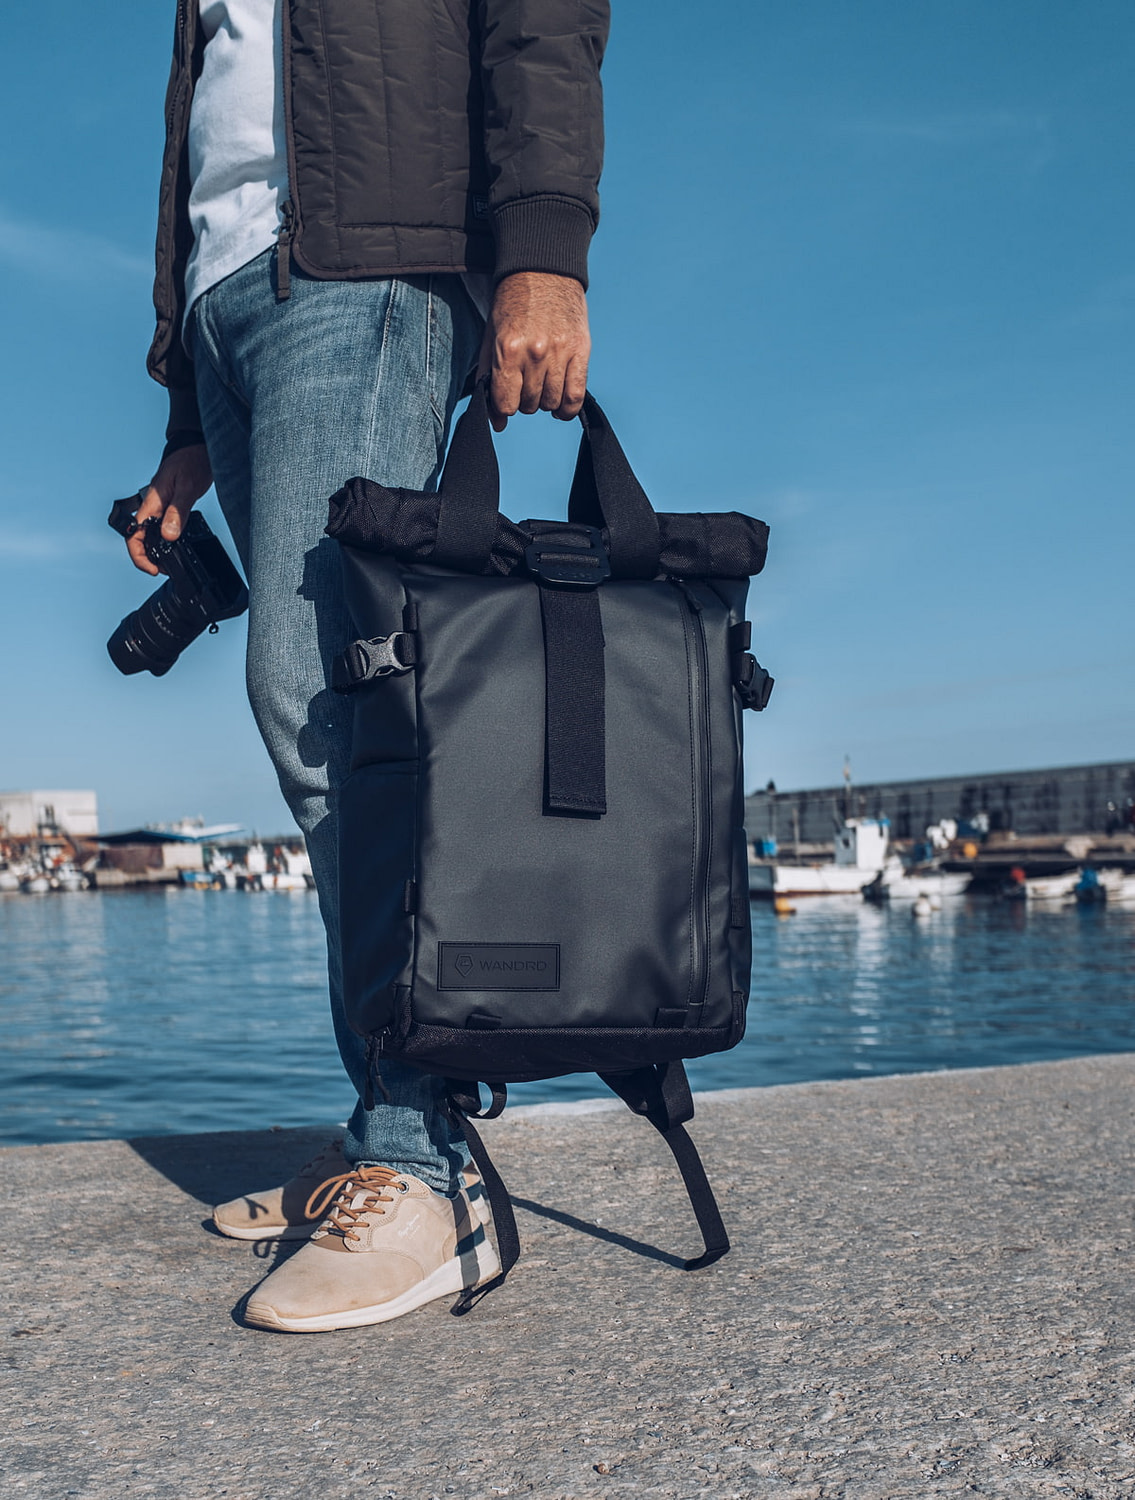 Best Travel & Photography Backpack